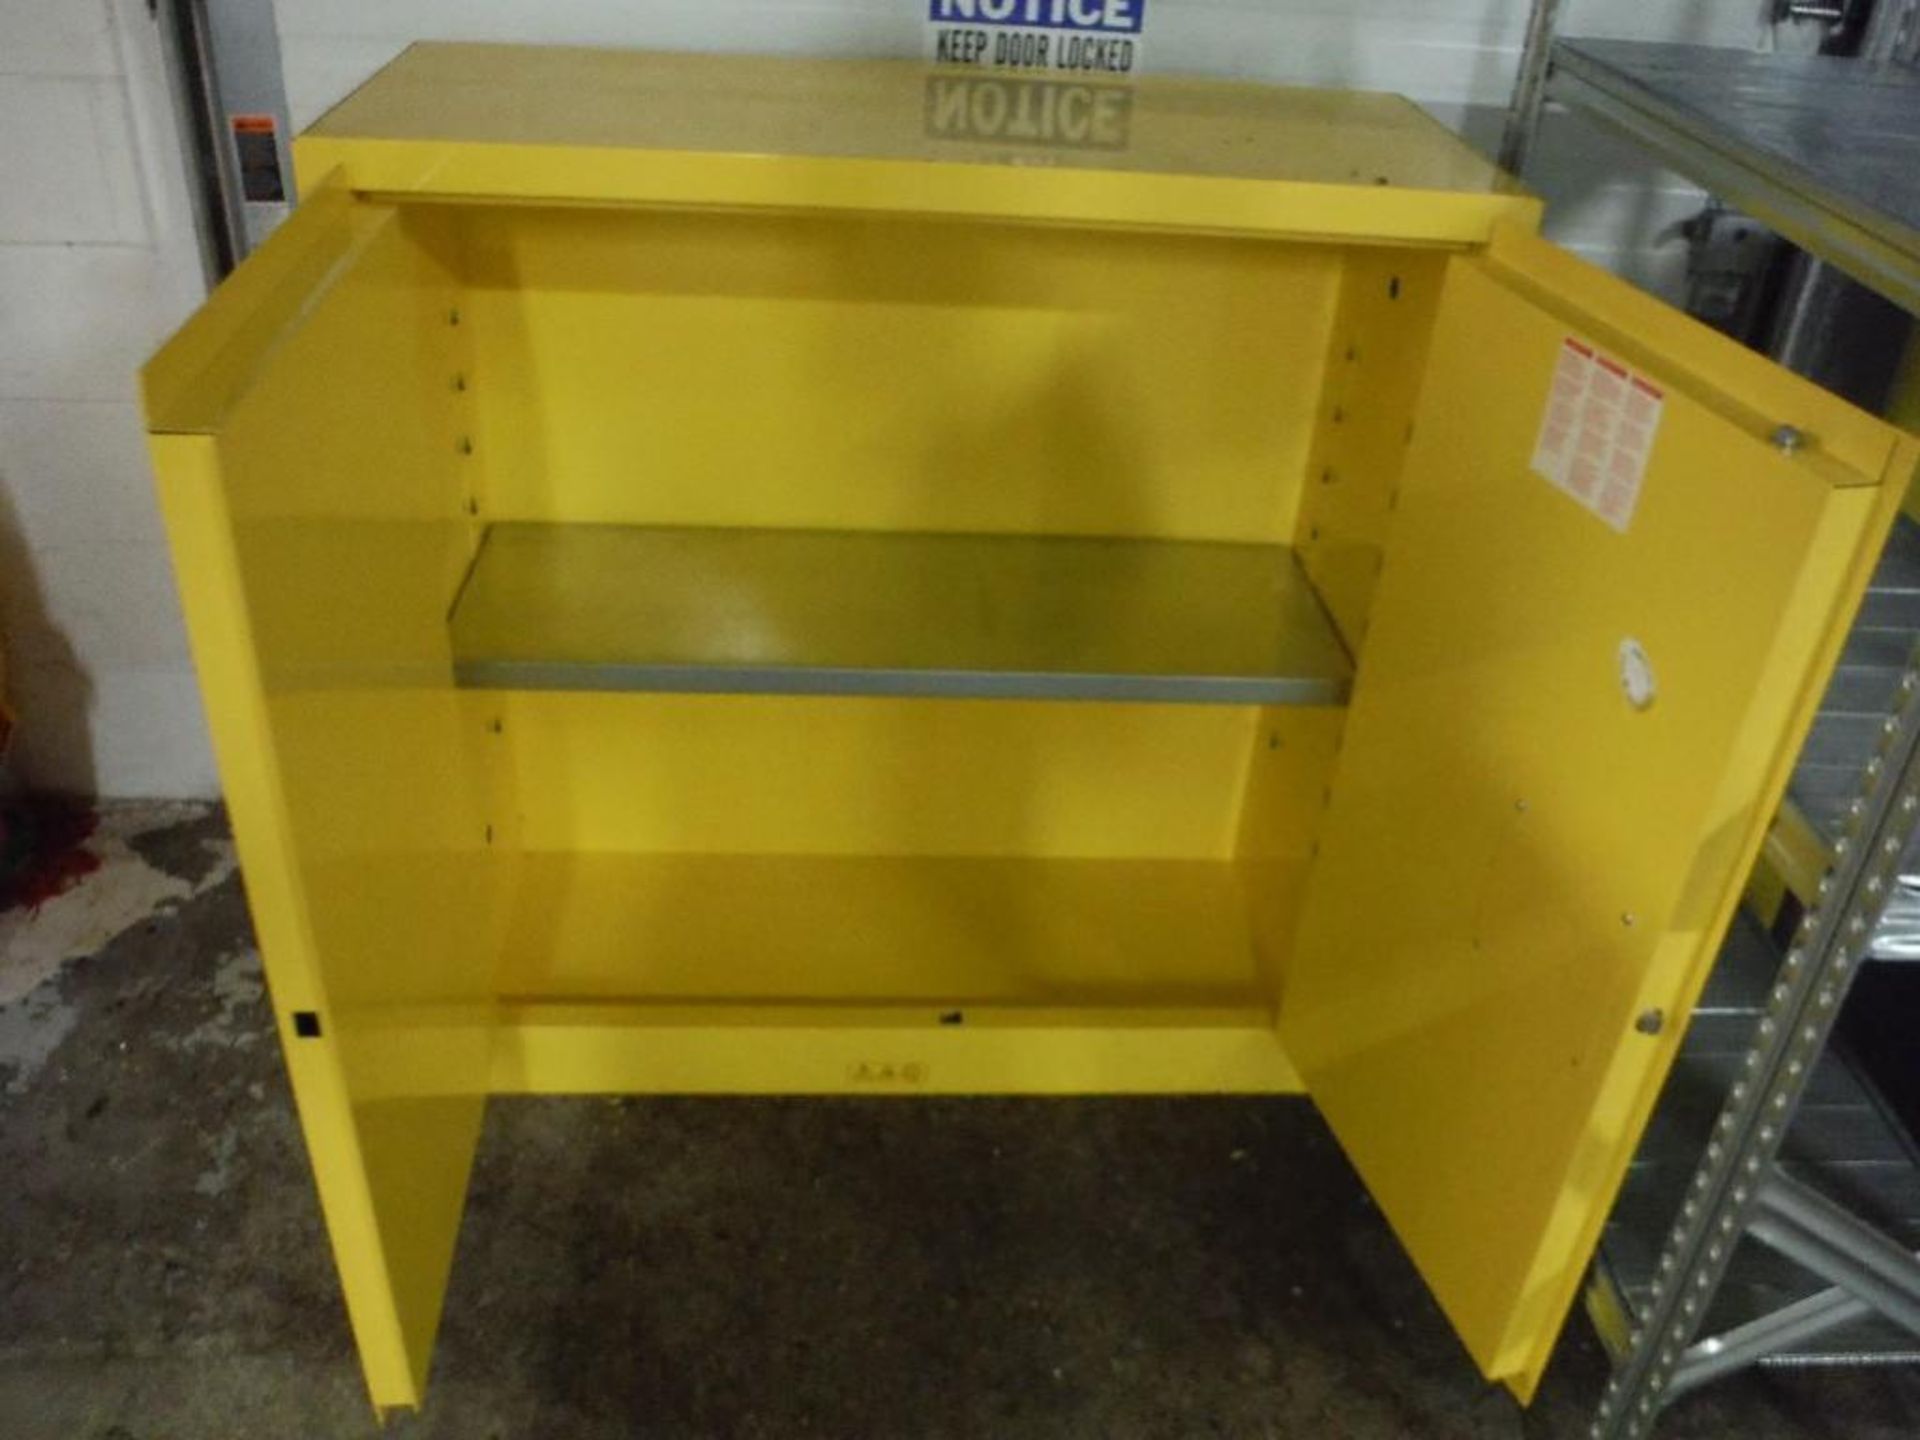 Just rite flammable storage cabinet, 30 gal, 43 in. wide x 18 in. deep 44 in. tall - Rigging Fee: $5 - Image 2 of 2